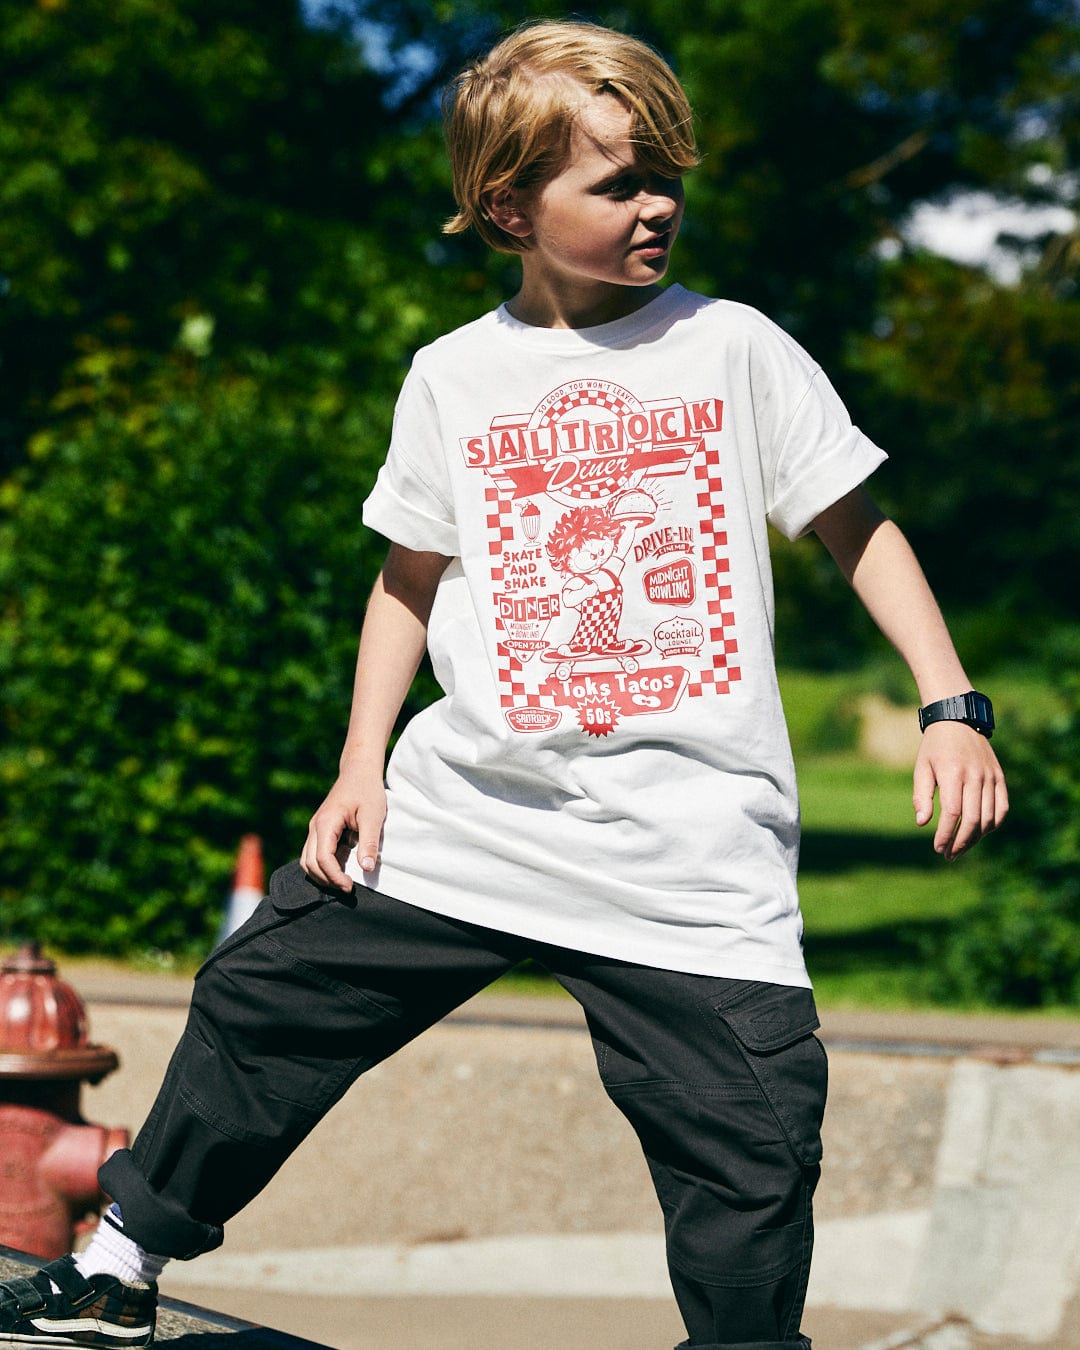 A young boy with blond hair stands outdoors wearing a white T-shirt featuring the "Taco Tok - Kids Short Sleeve T-Shirt" by Saltrock and black pants. He is looking to the side with one foot on a slightly higher surface.